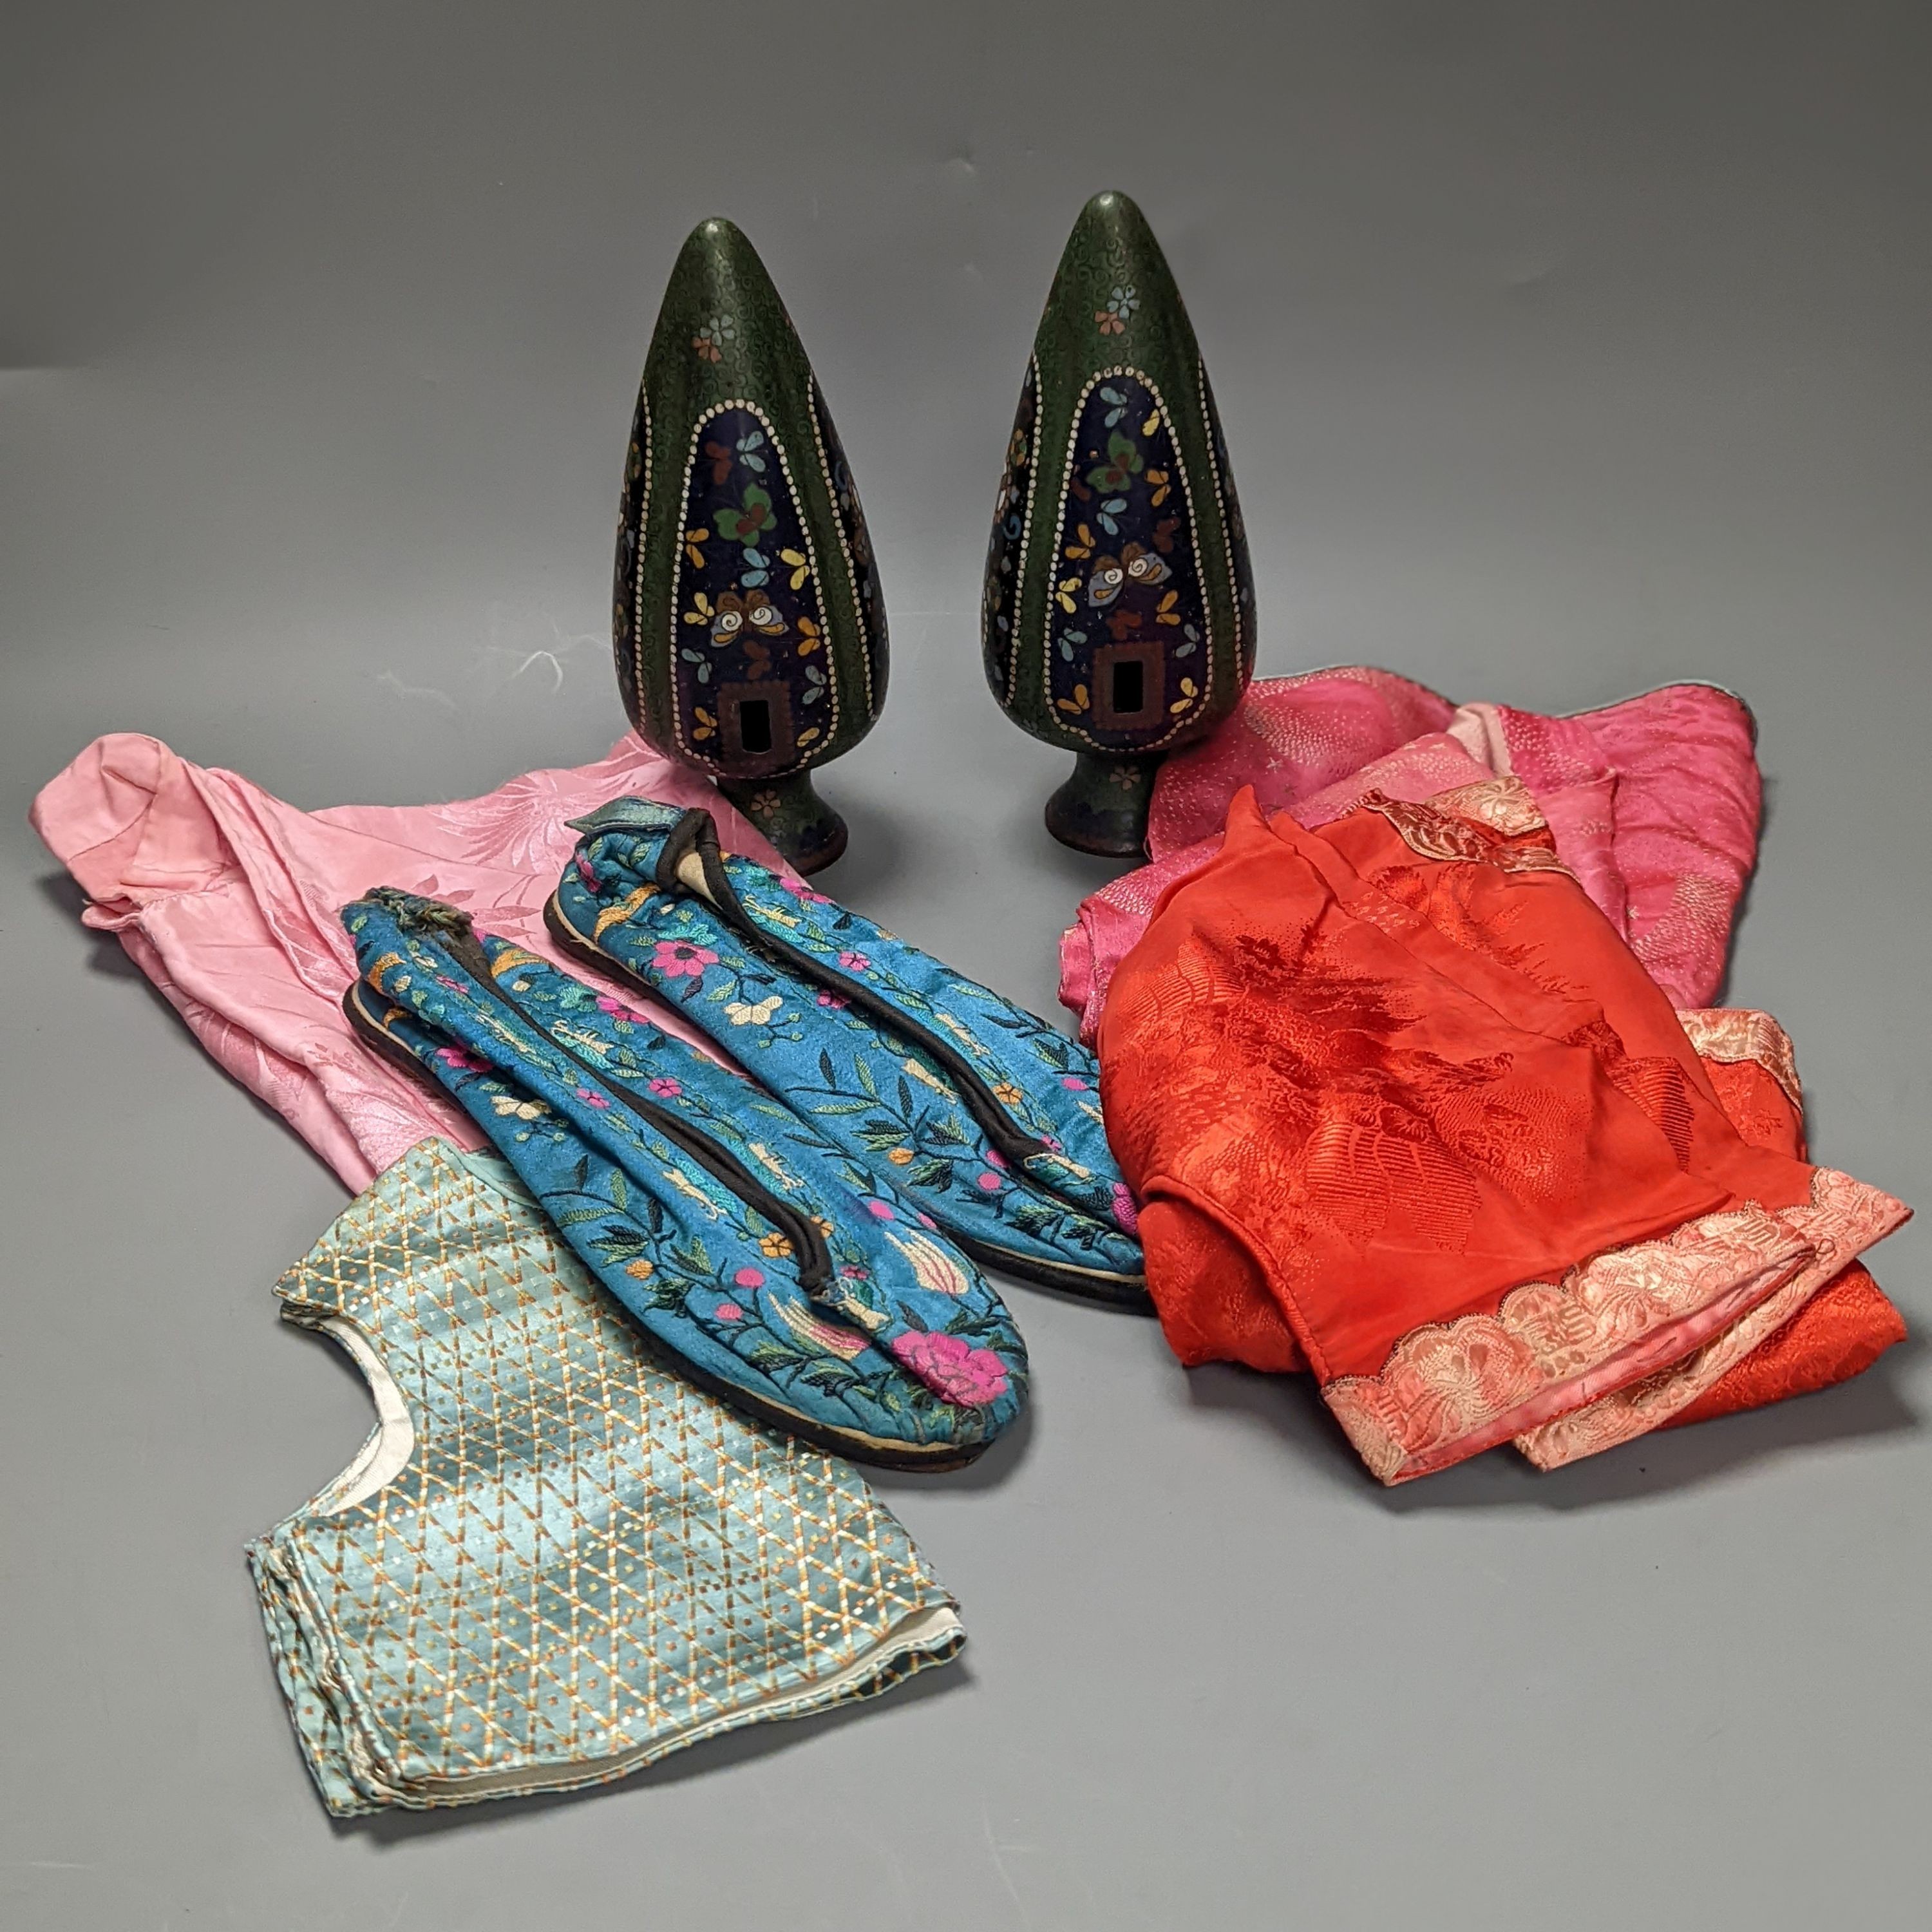 A pair of Japanese cloisonné enamel vases, Japanese slippers and other clothing